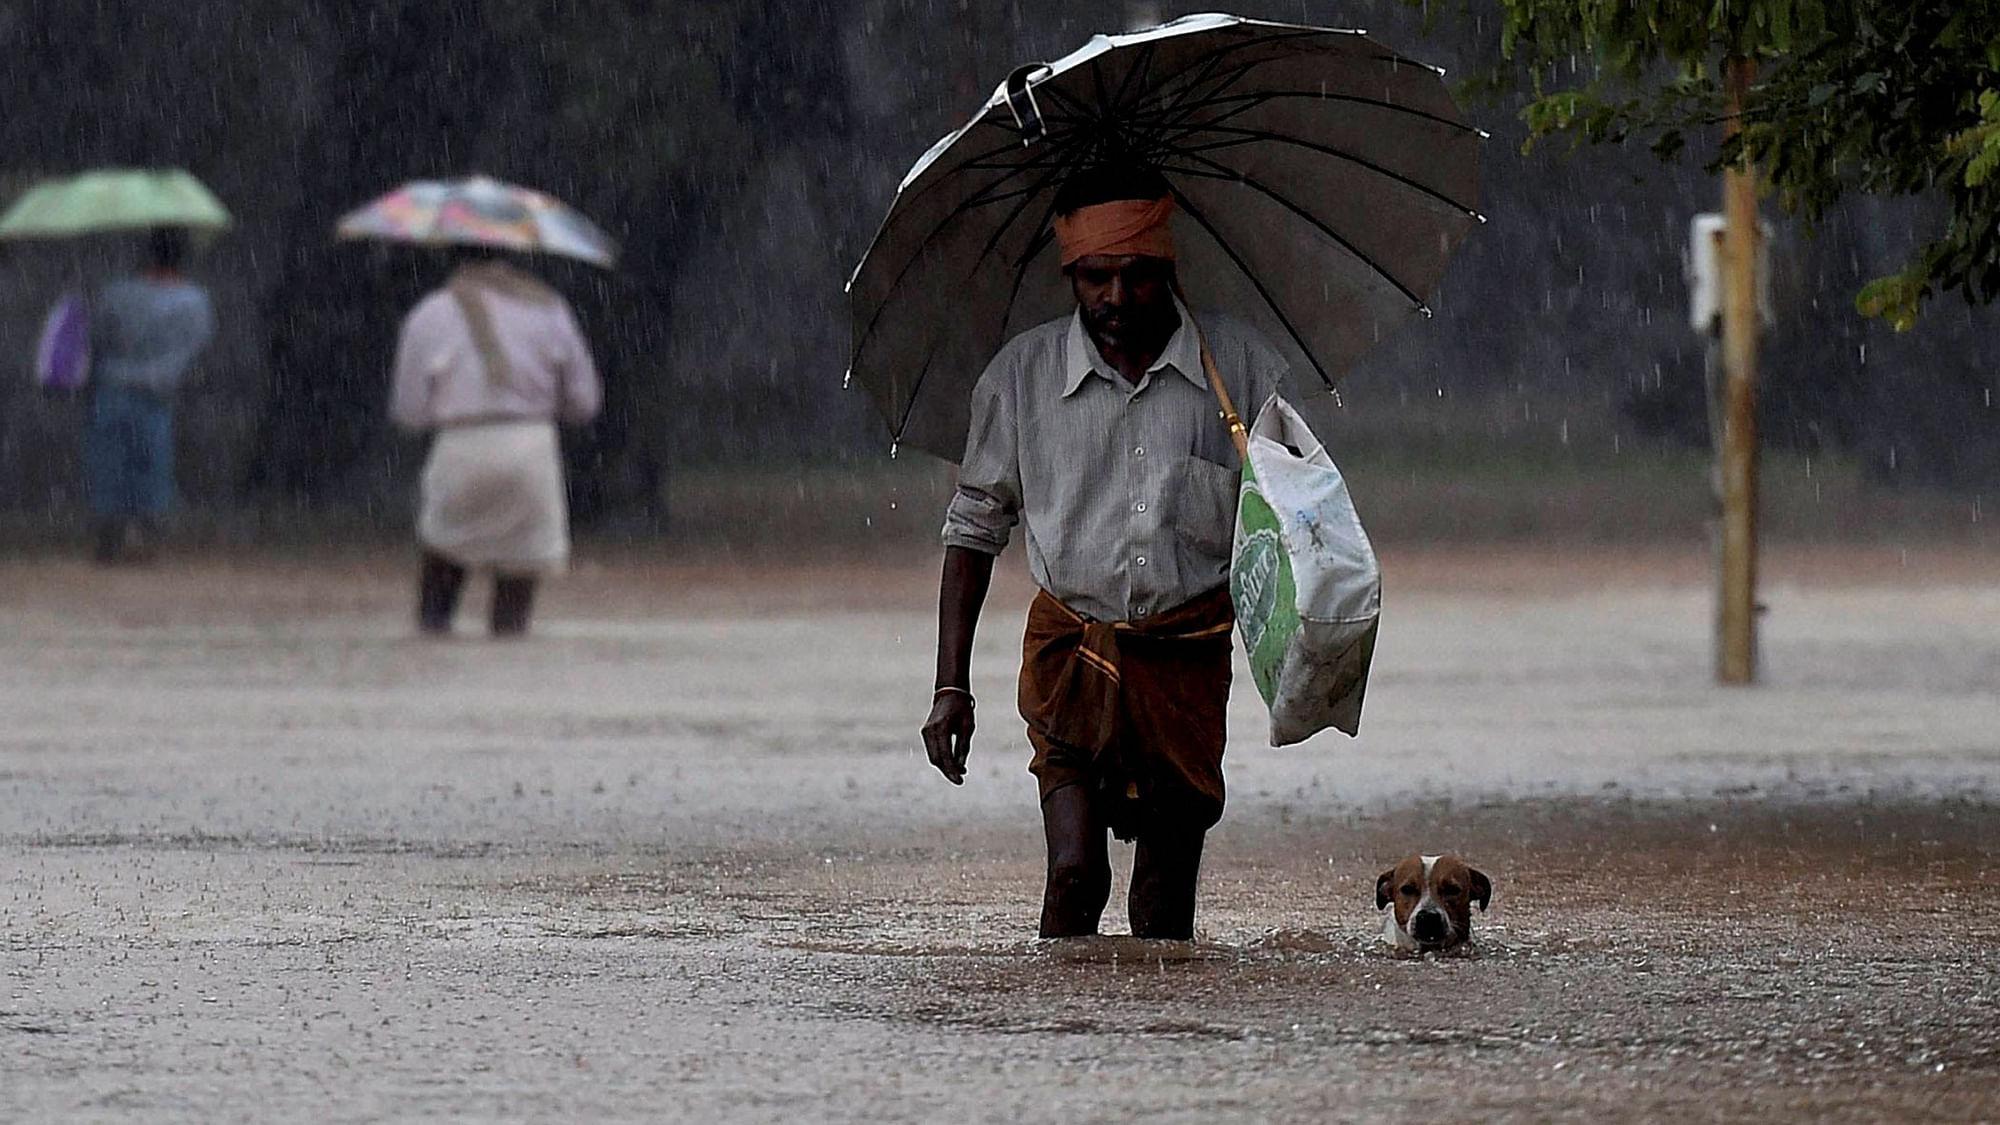 It’s been raining without a break in Chennai. (Photo: <b>The Quint</b>)